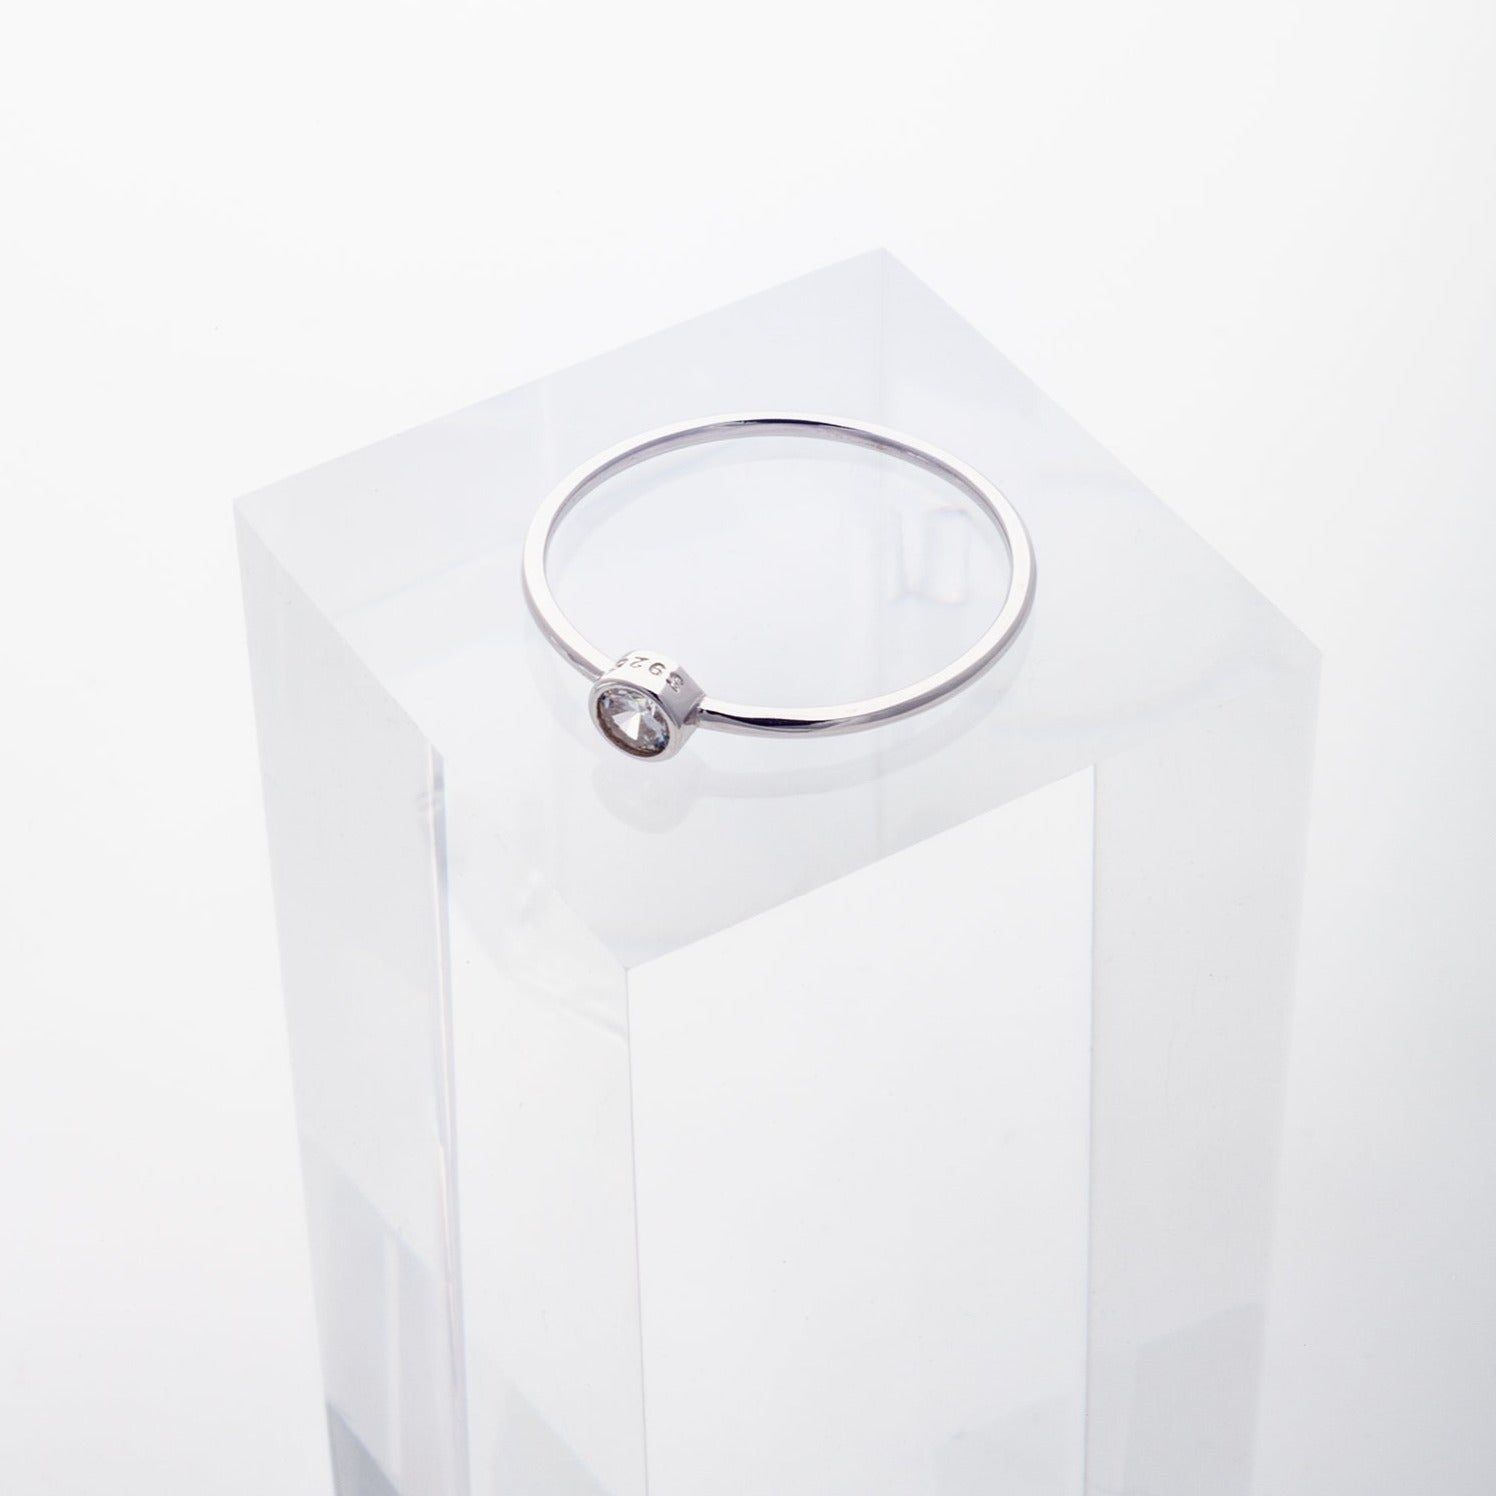 The Classic Ring in Silver